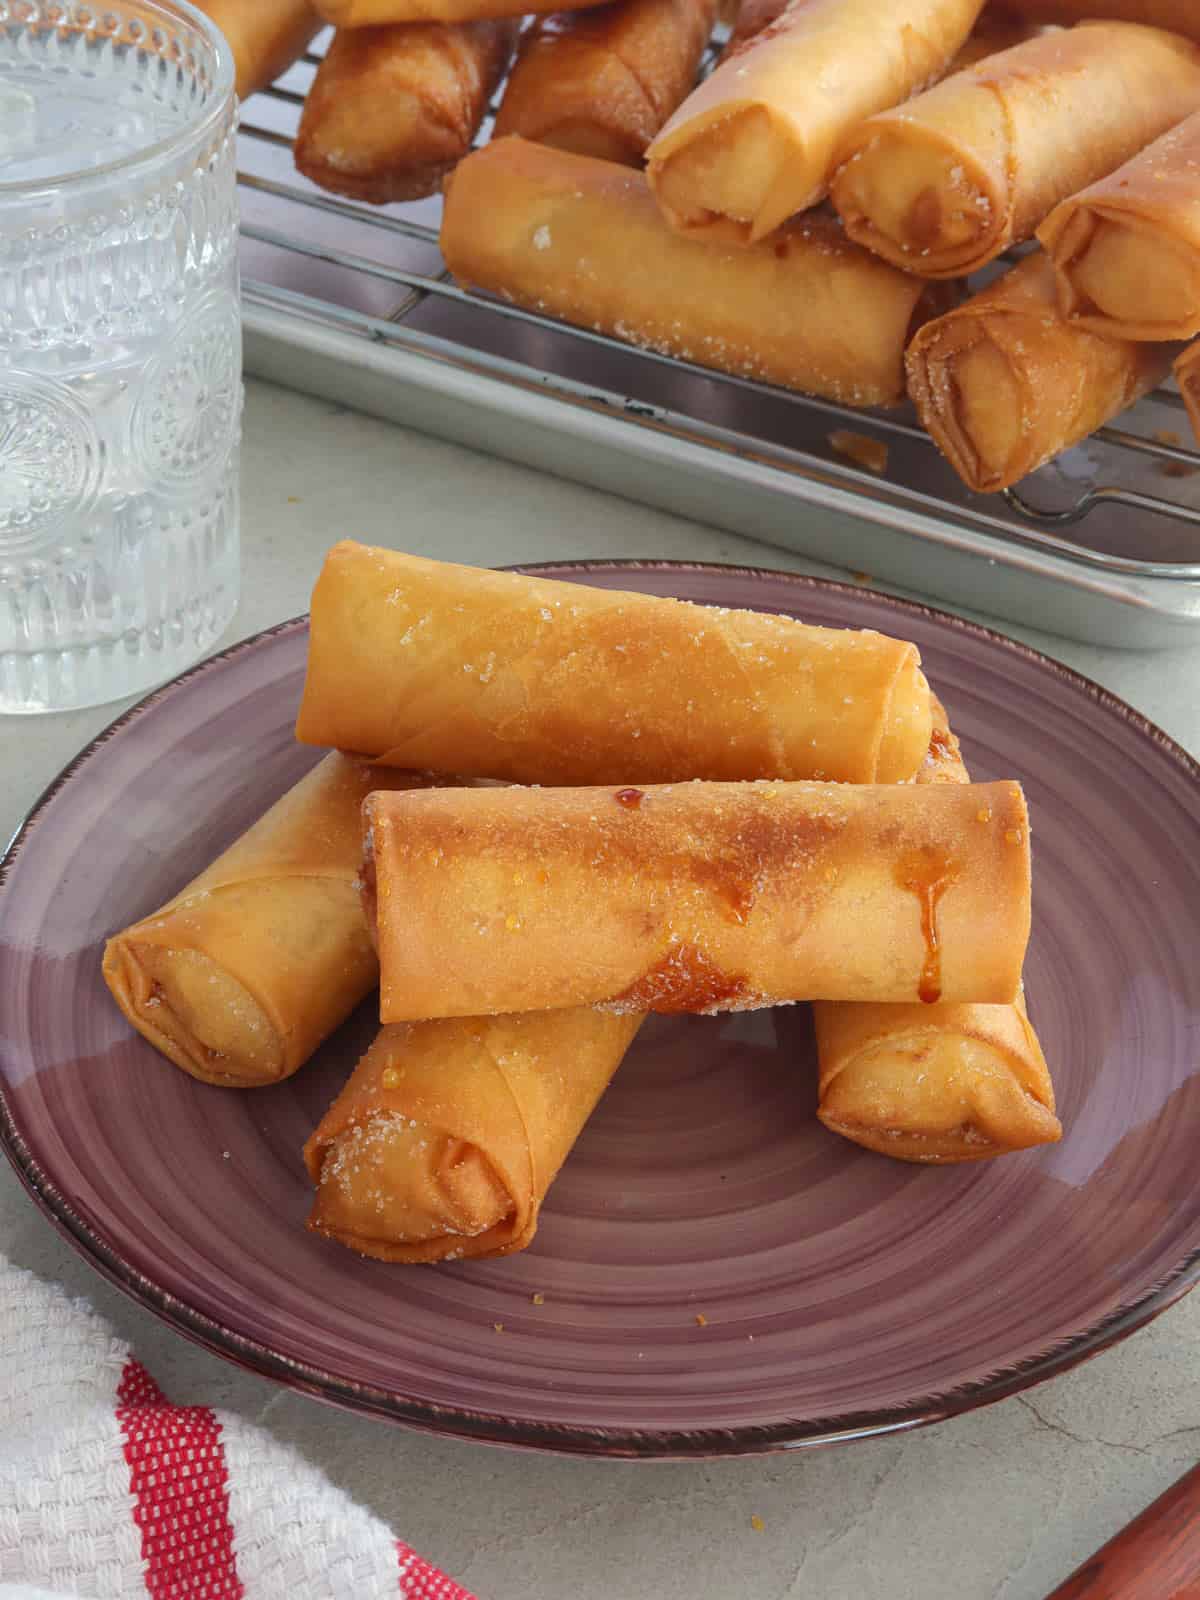 Turon Malagkit on a serving plate with glass of water in the background.